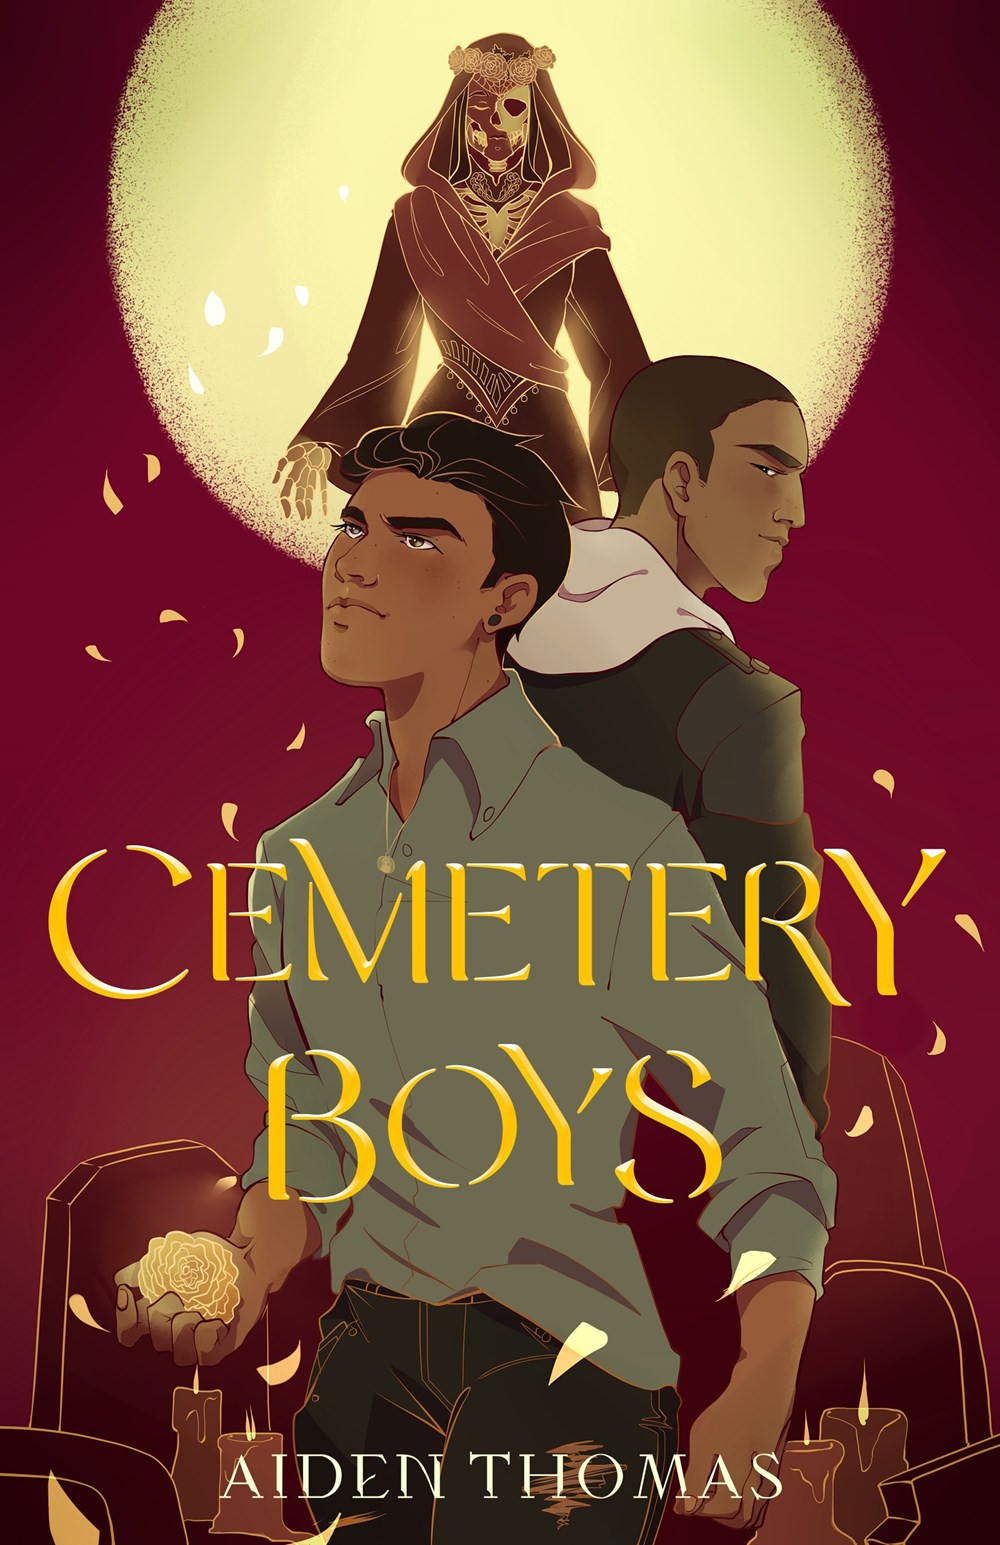 Image for "Cemetery Boys"